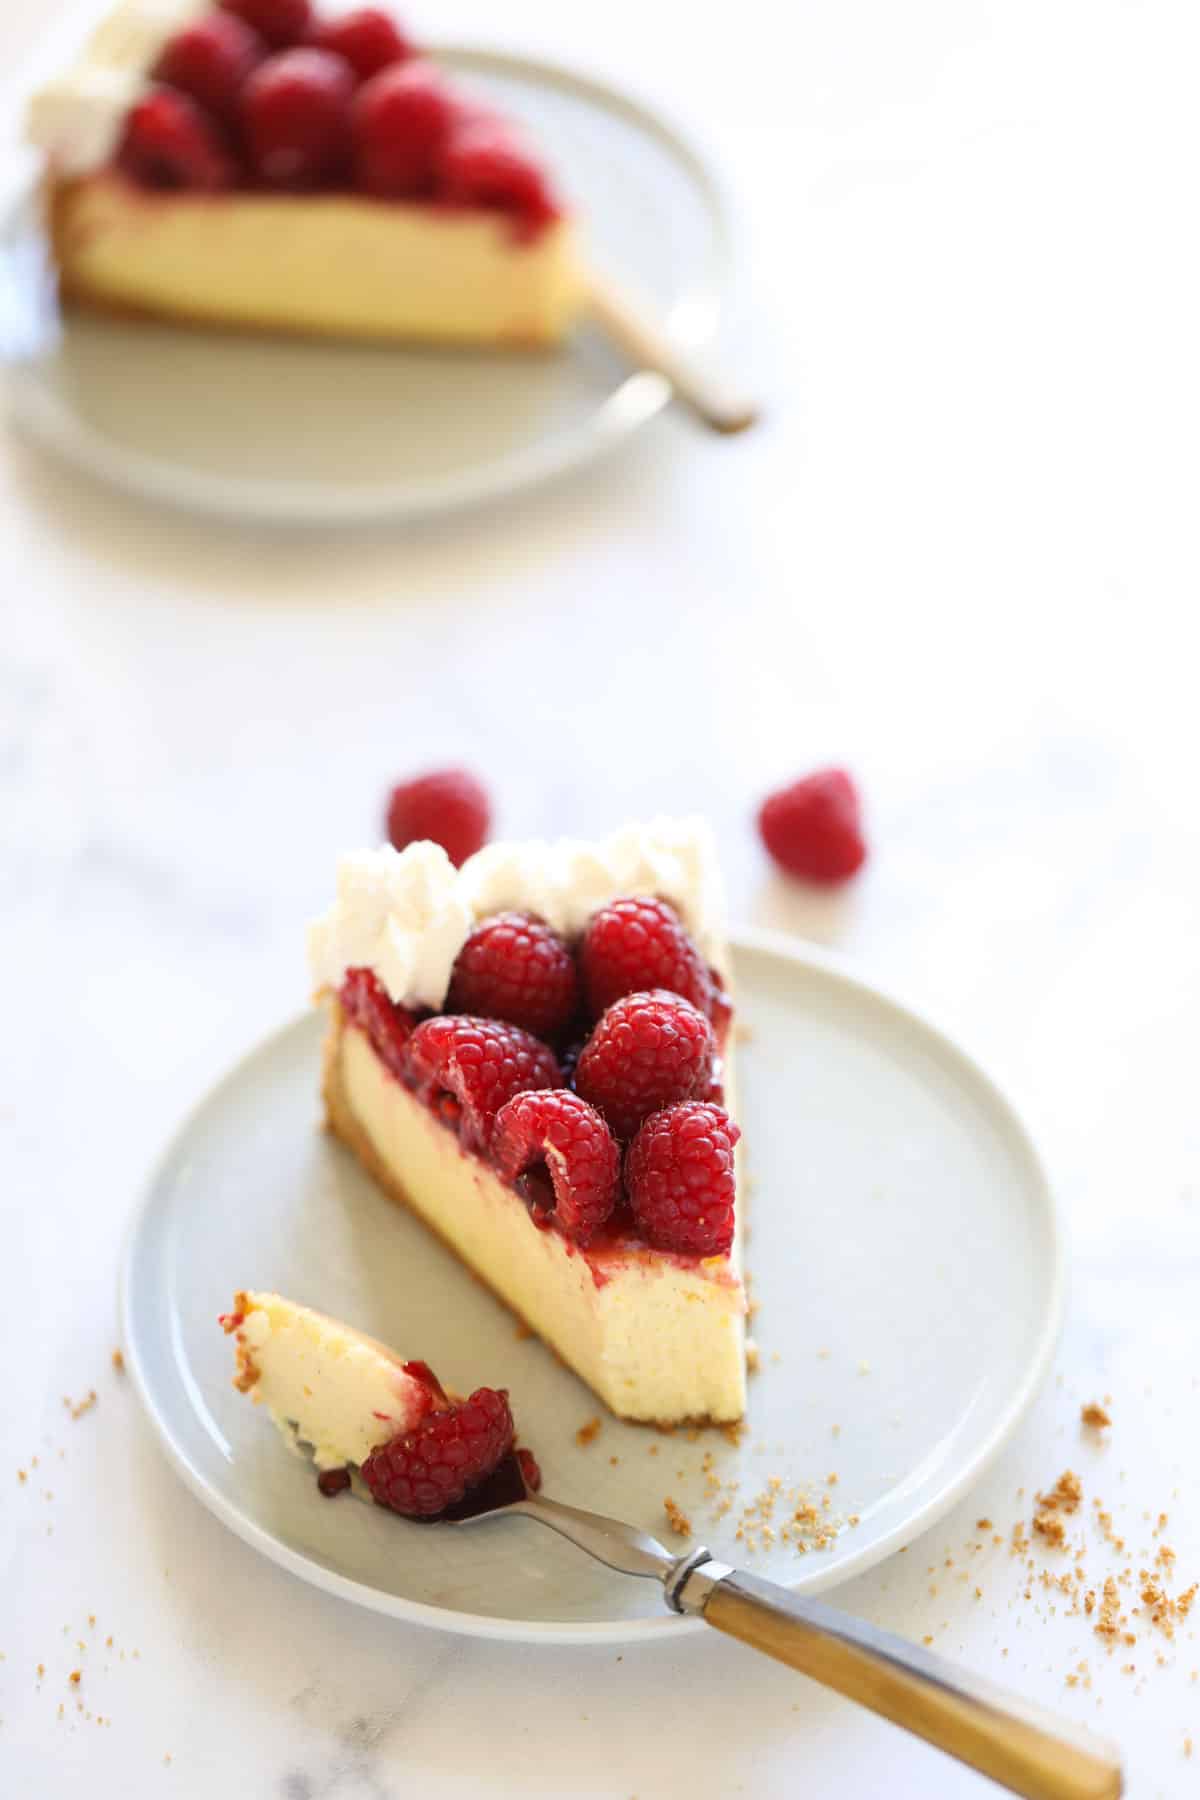 a slice of cheesecake with a bite taken out of it